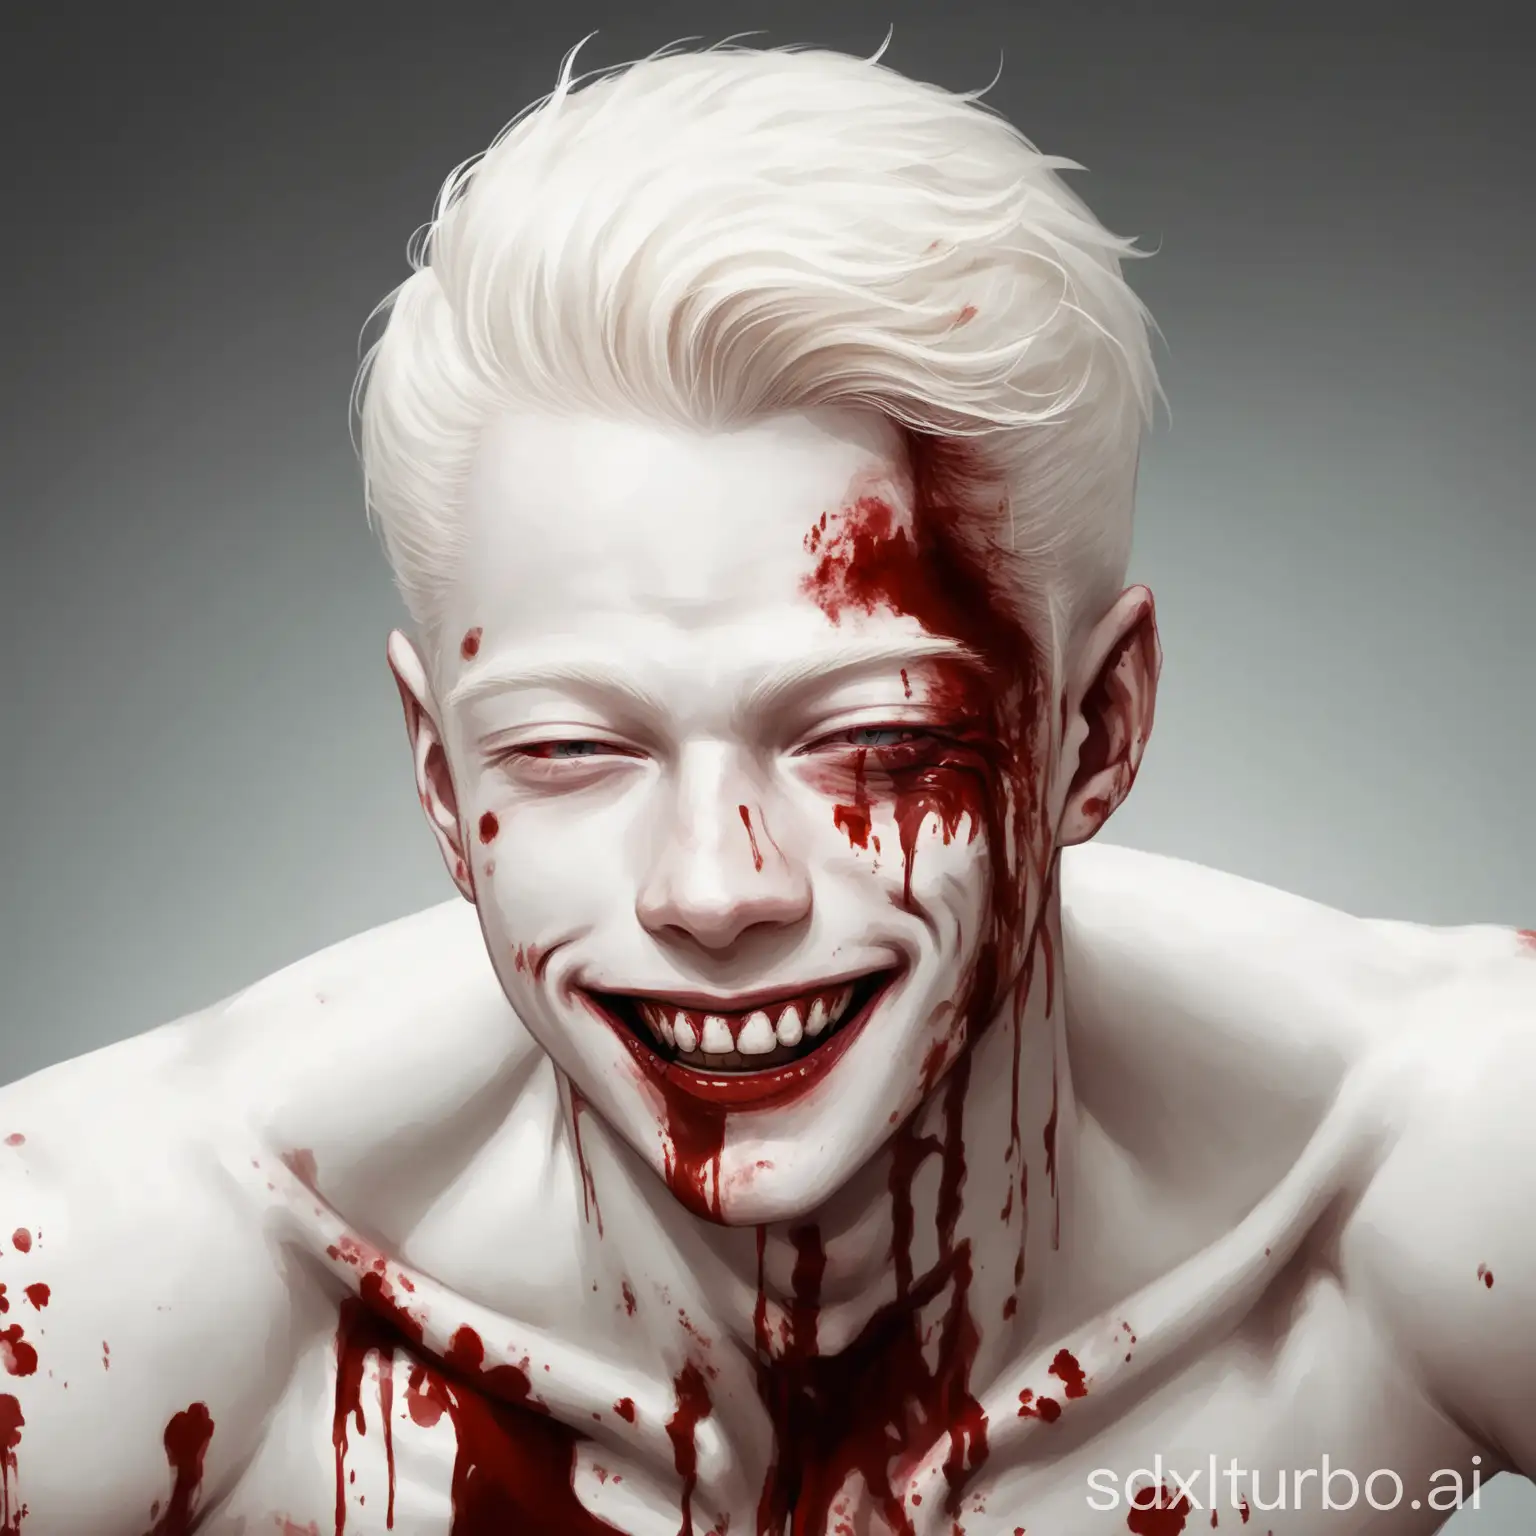 Albino handsome man, with gore blood stains on the face, smiling